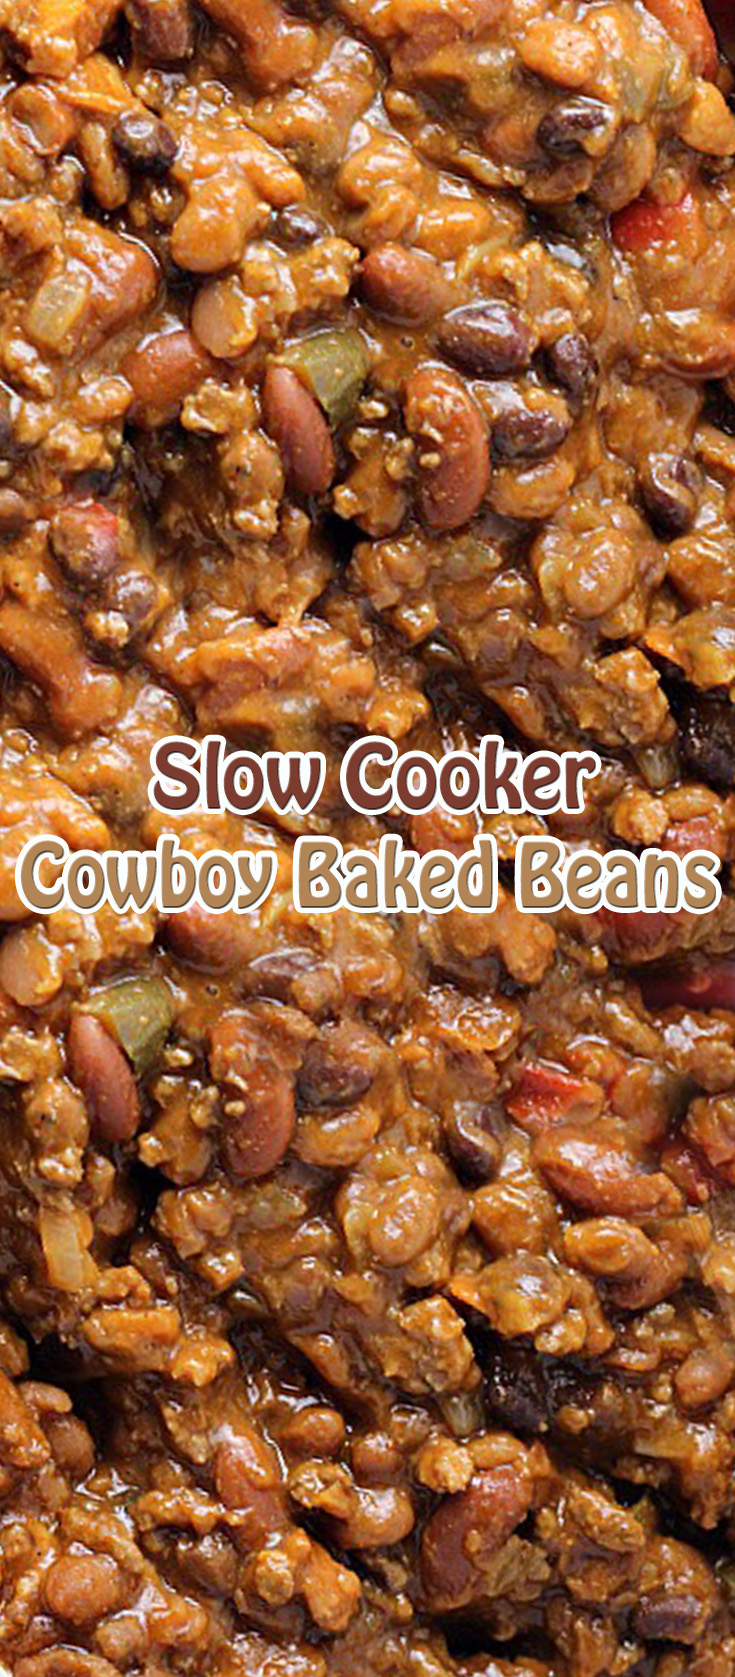 Slow Cooker Cowboy Baked Beans